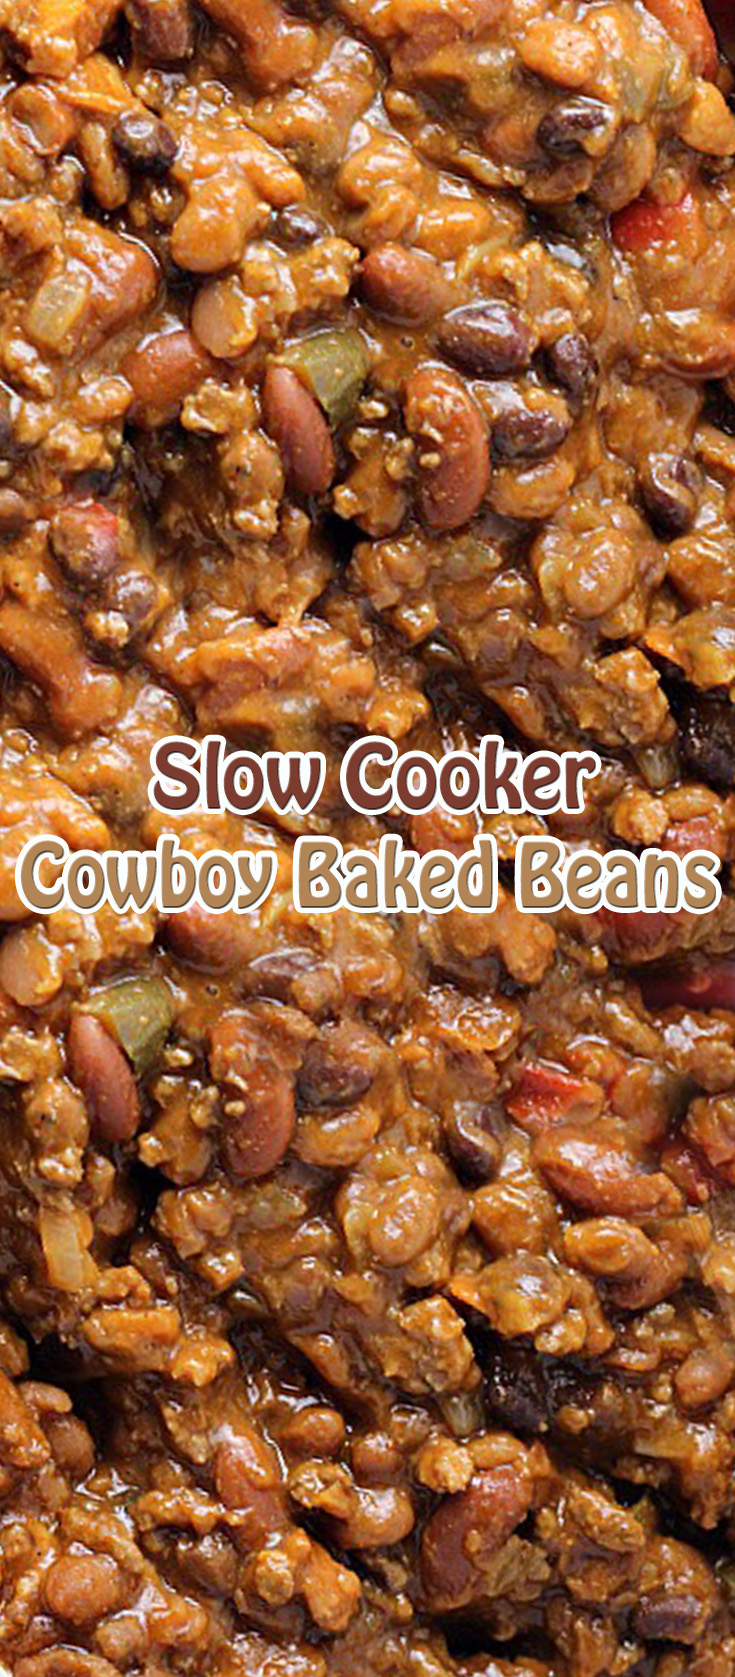 Slow Cooker Cowboy Baked Beans